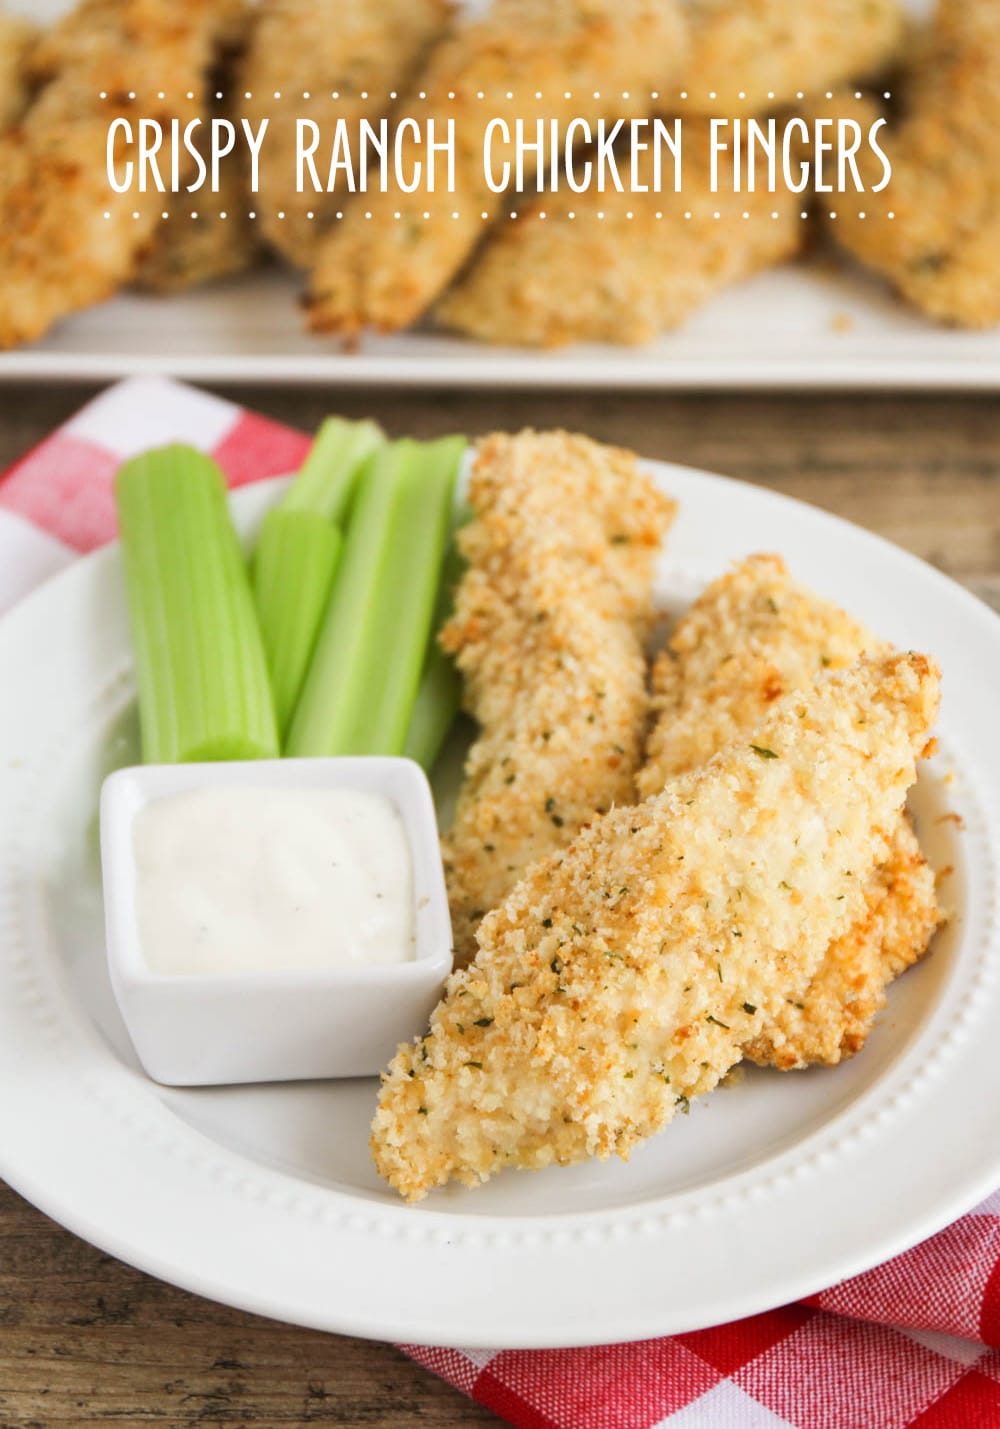 These crispy chicken fingers are baked in the oven and so delicious and flavorful. This chicken strips are a healthier version so you can feel great about serving them to your family. #chickenfingers #bakedchickenfingers #homemadechickenstrips #chickenstriprecipe #howtomakechickenfingerstrips via @somewhatsimple